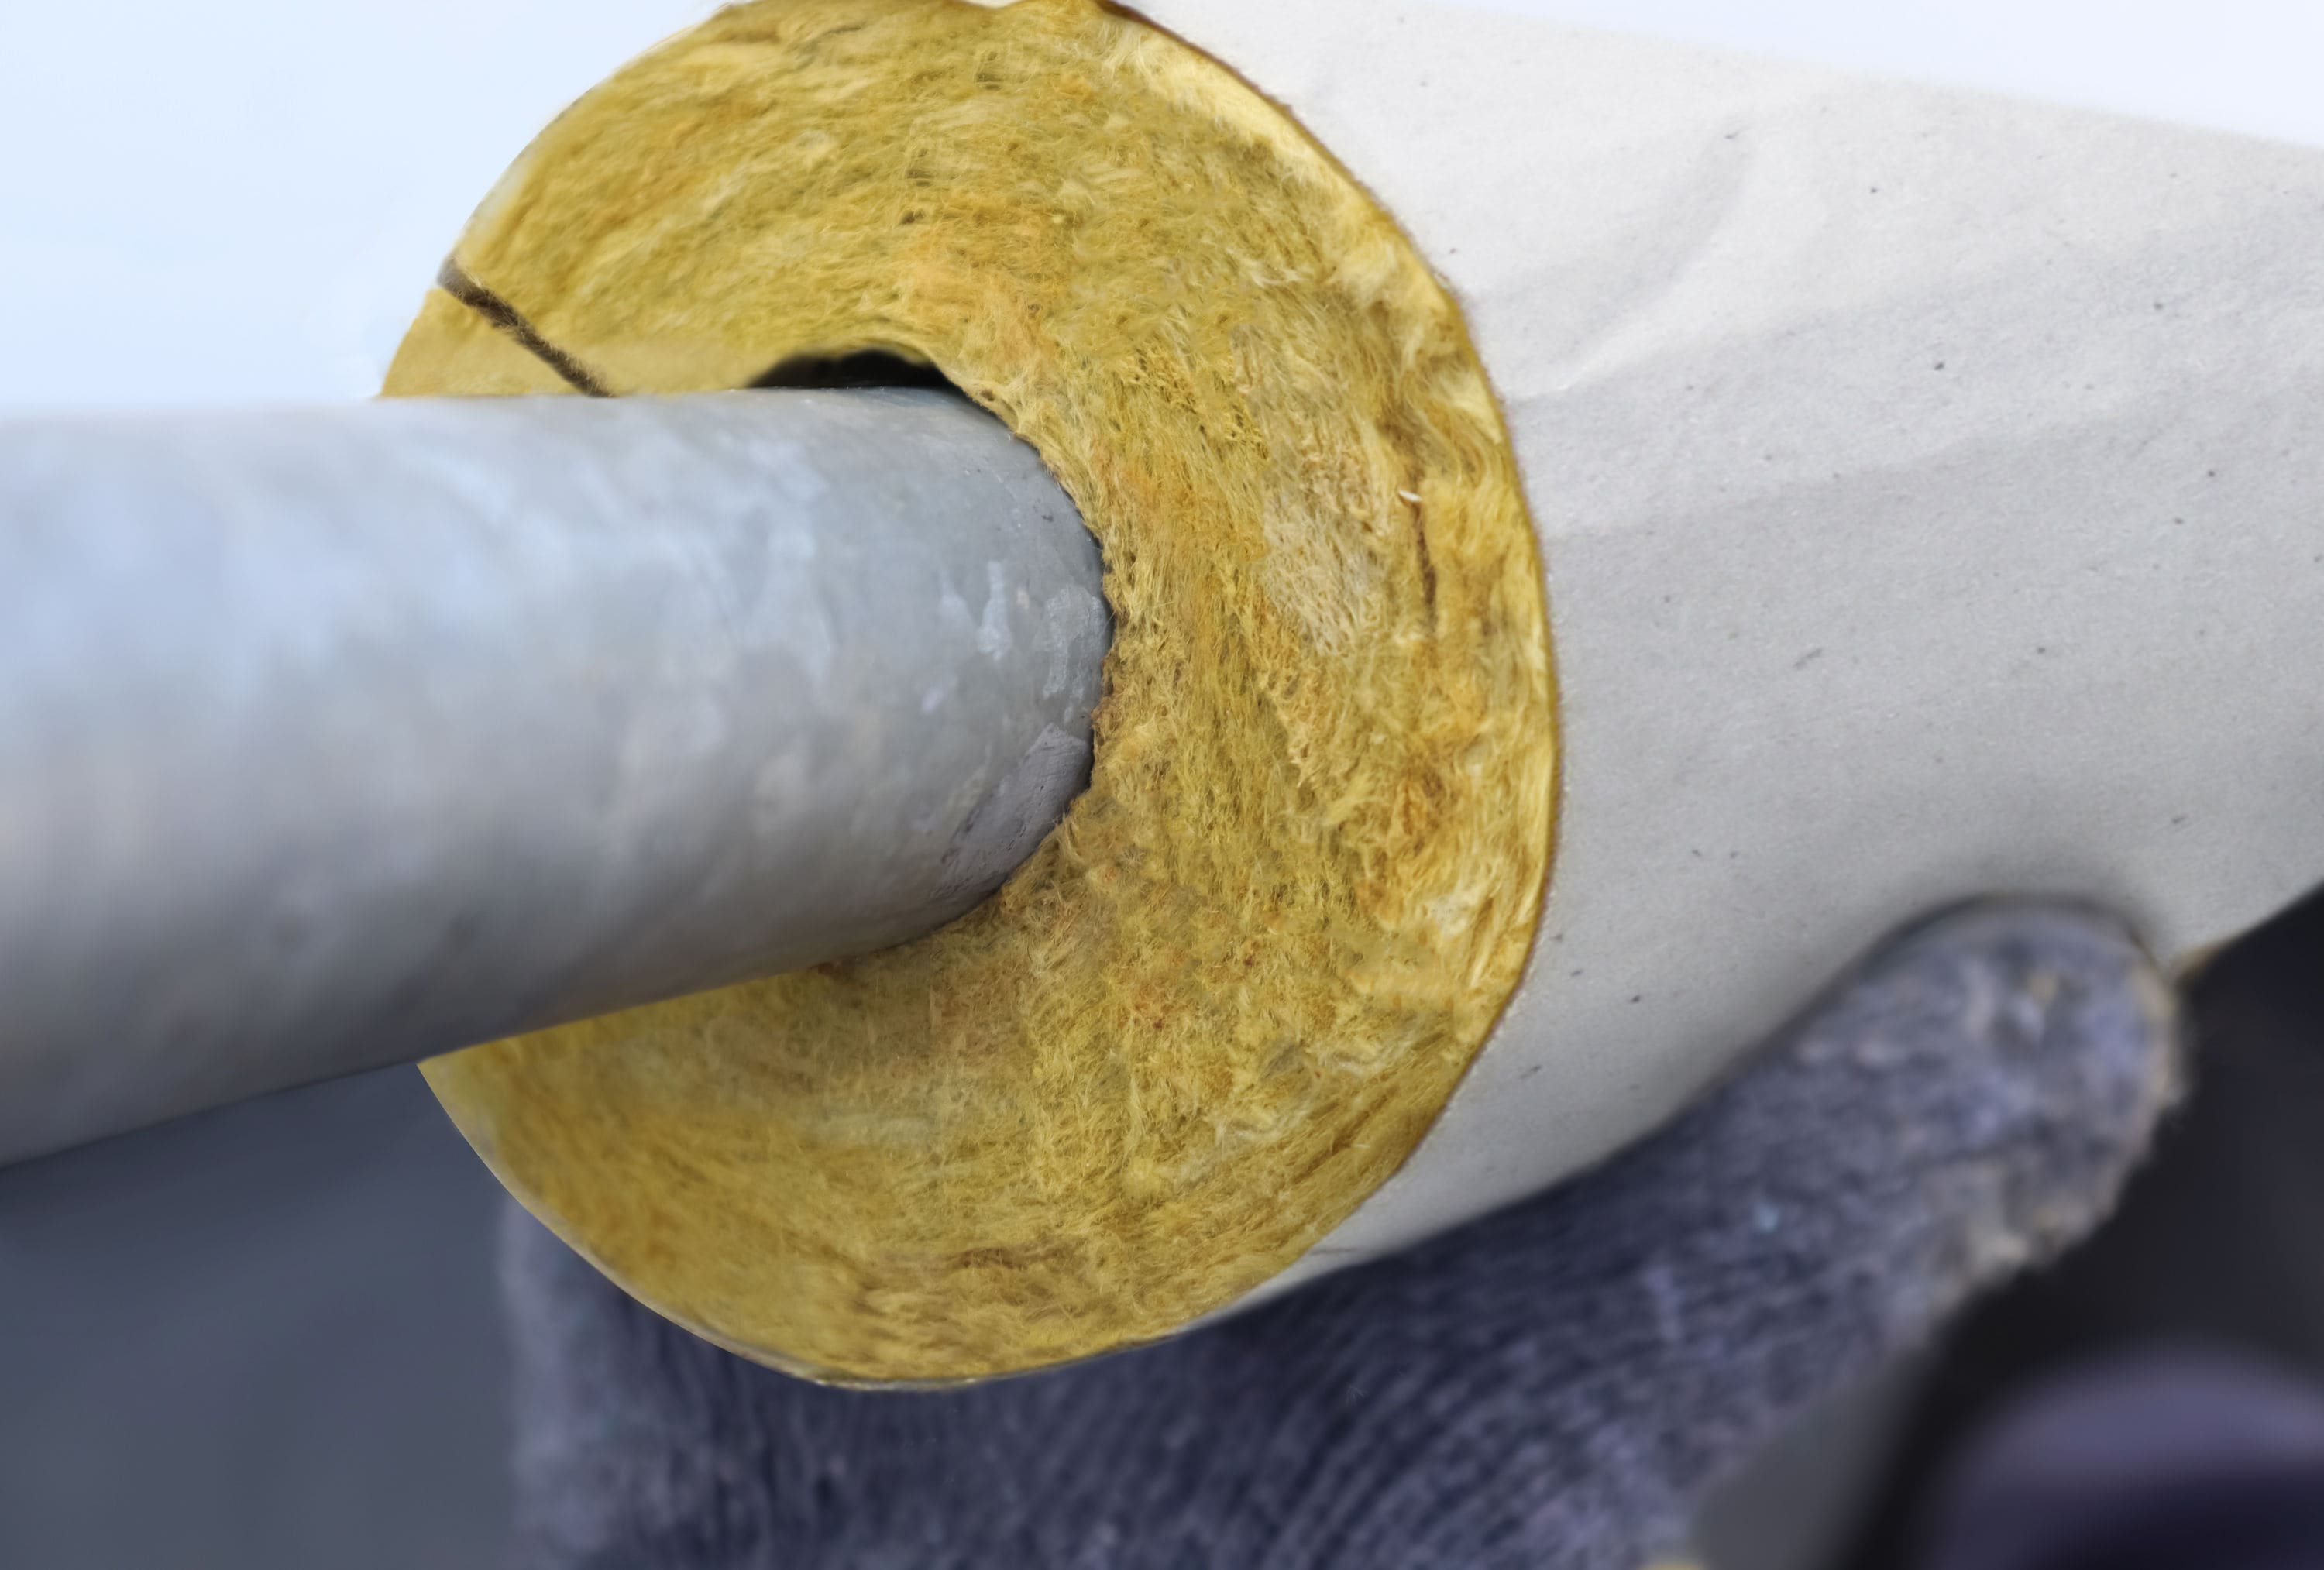 Frost King 3-ft Fiberglass Tubular Pipe Insulation in the Pipe